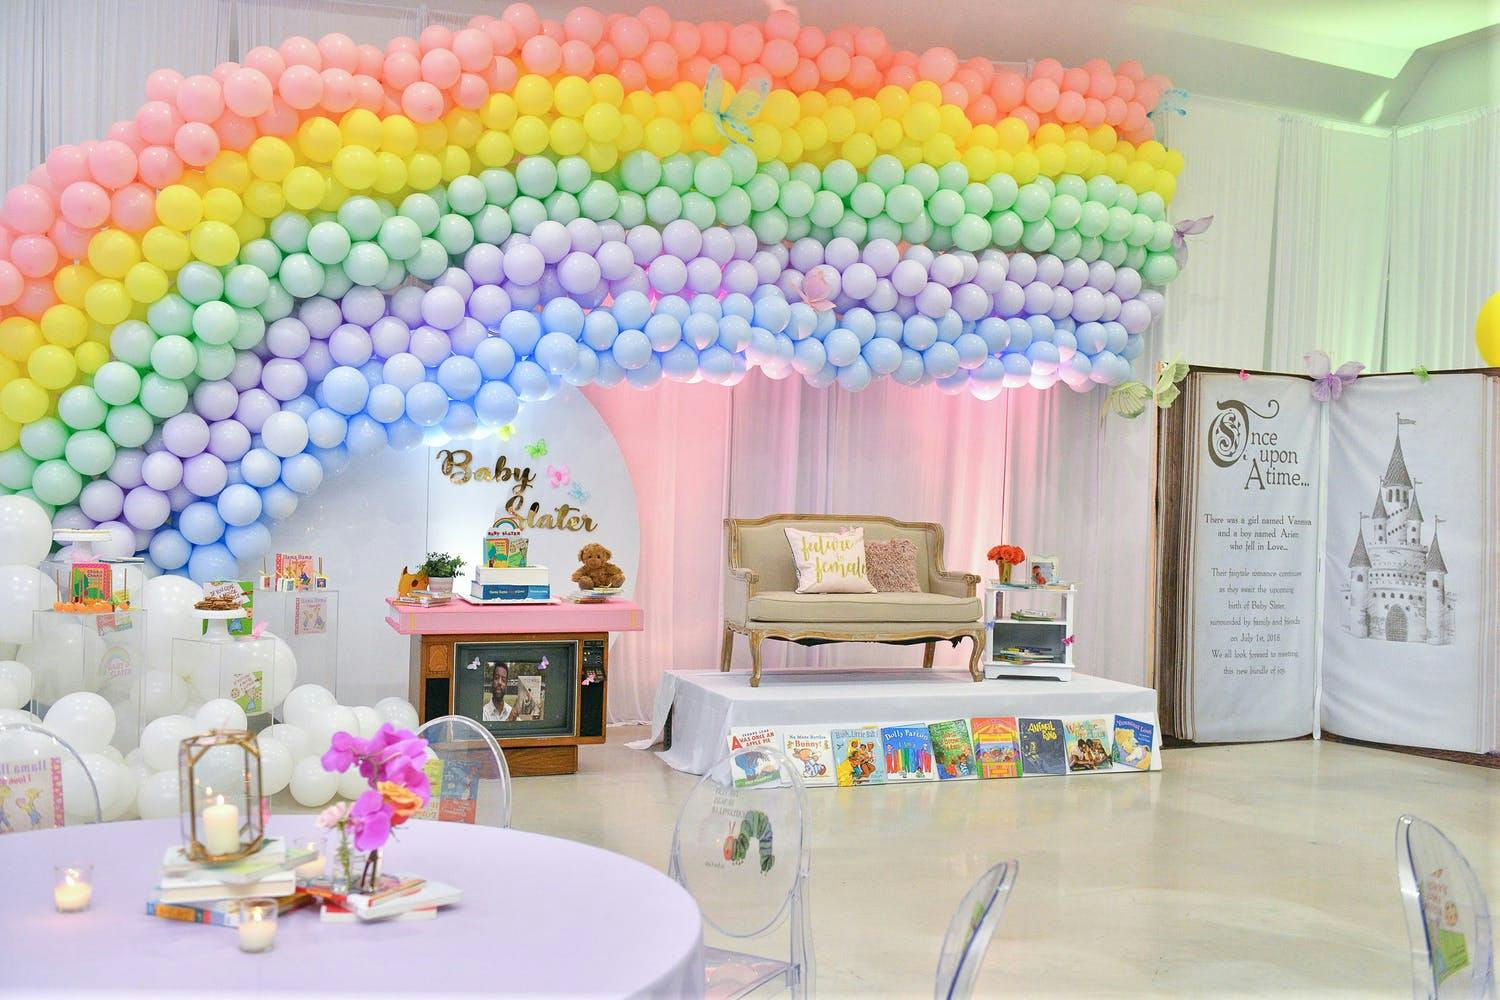 Baby Shower With Rainbow Balloon Installation and Giant Fairytale Book Photo Op | PartySlate